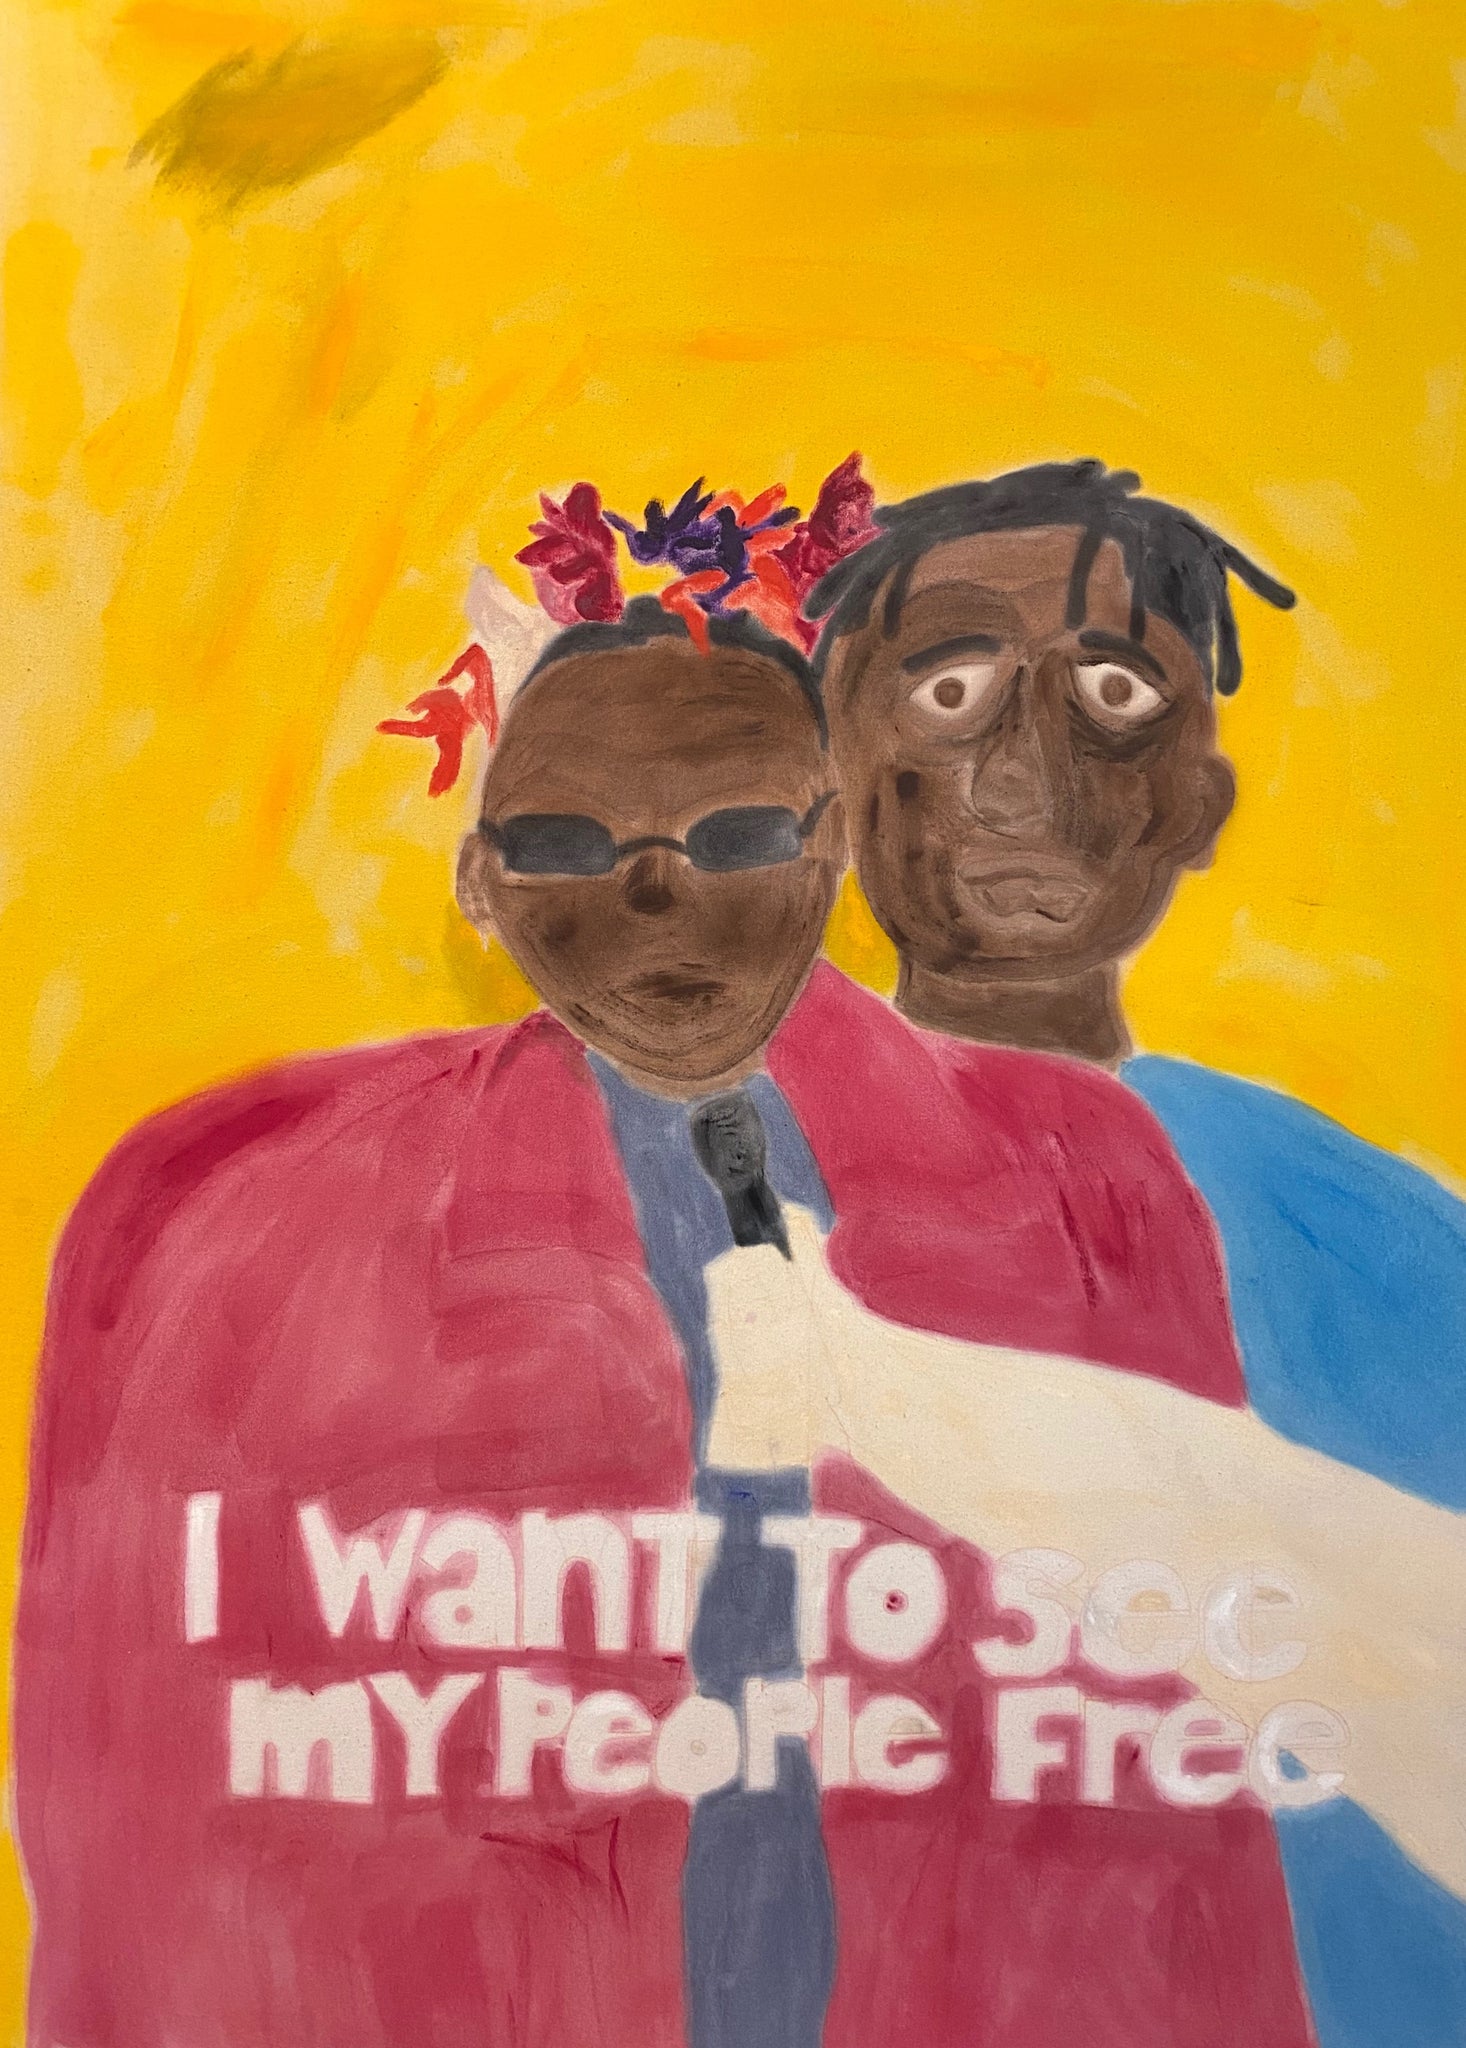 Marcus Leslie Singleton, "I Want To See My People Free"